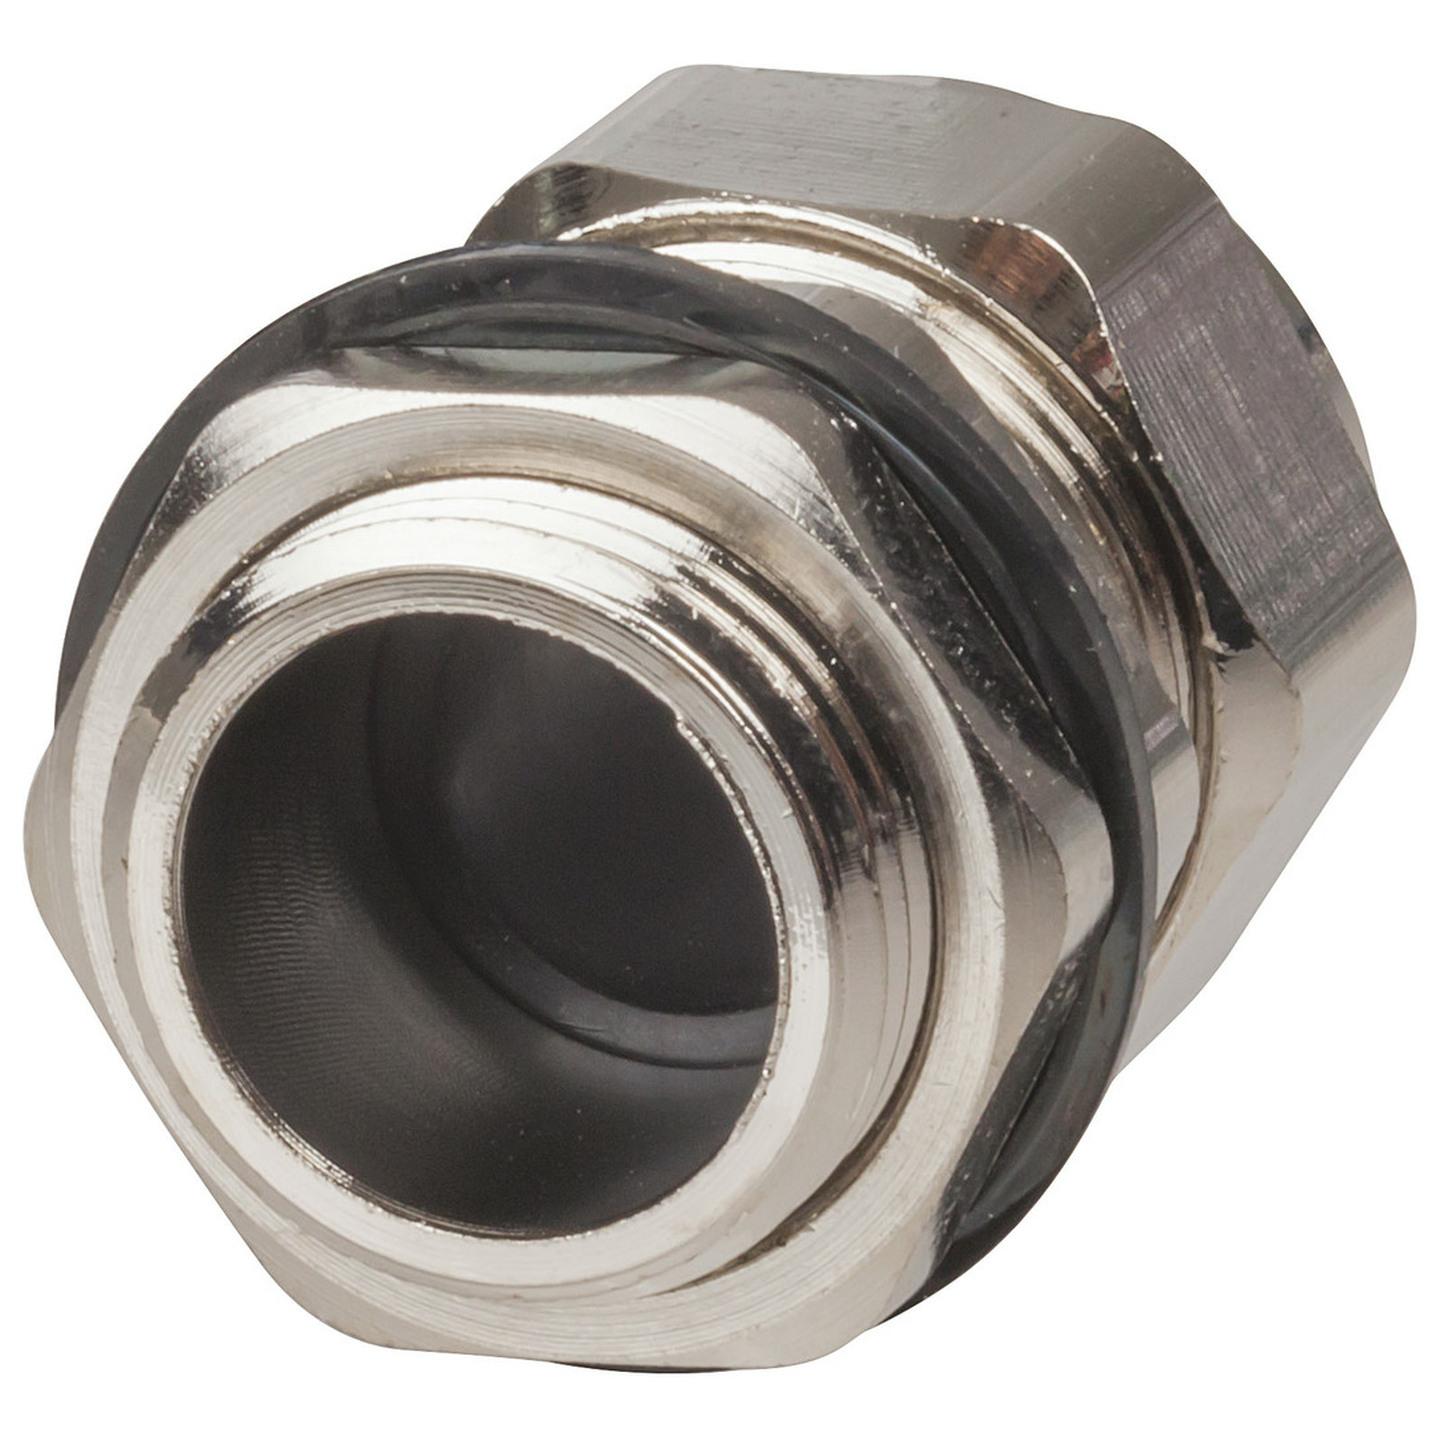 IP68 Nickel Plated Copper Cable Glands 6 to 12mm Pack of 2